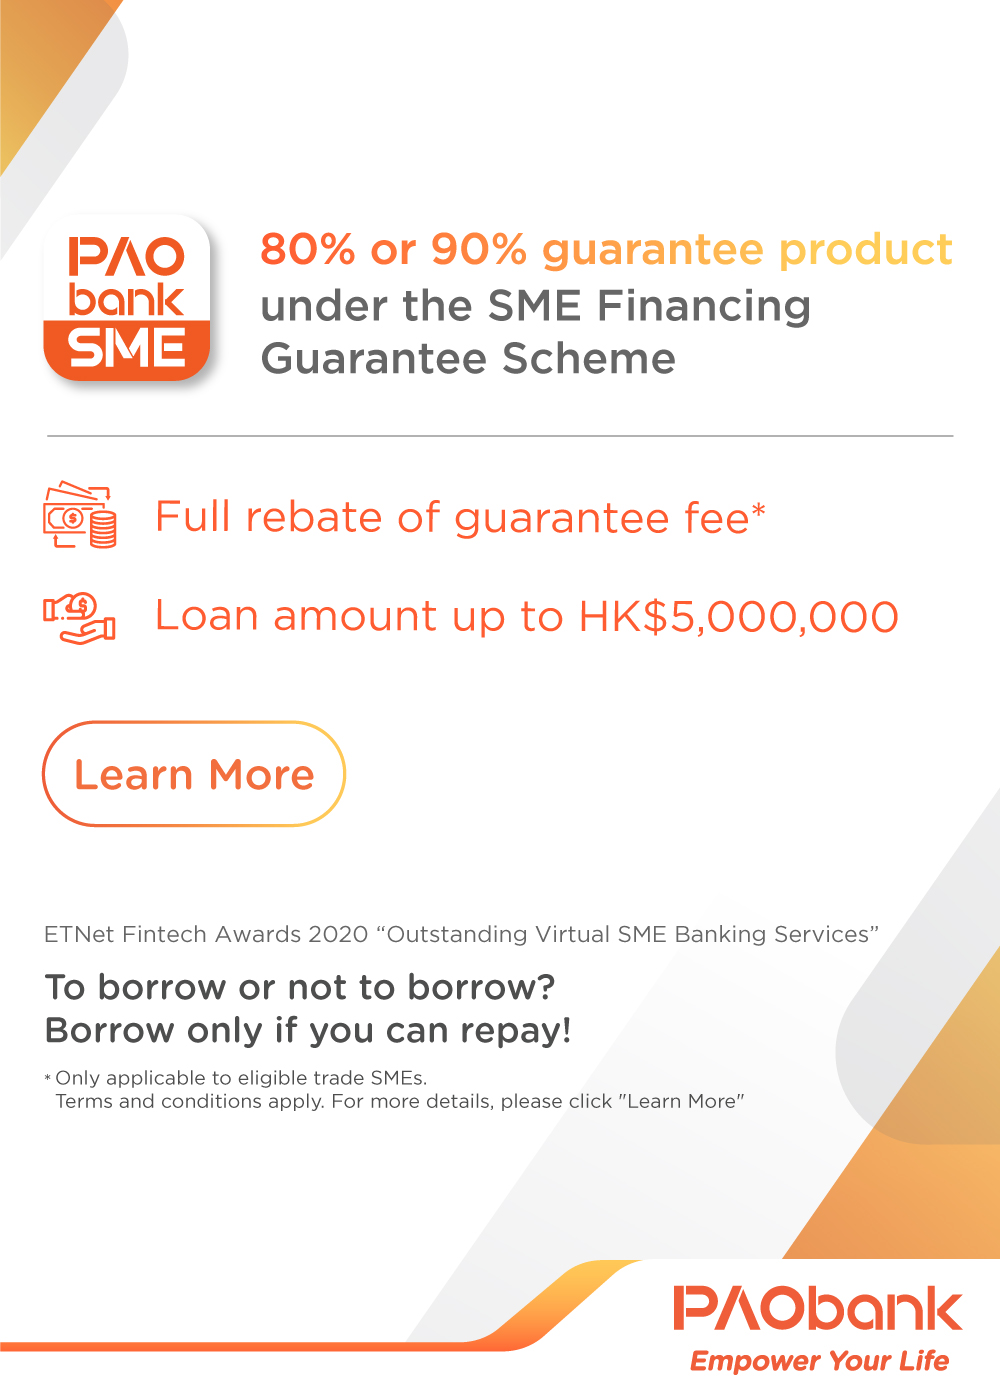 PAOB SME Services - virtual bank licence granted by the
                    Hong
                    Kong Monetary Authority (HKMA)